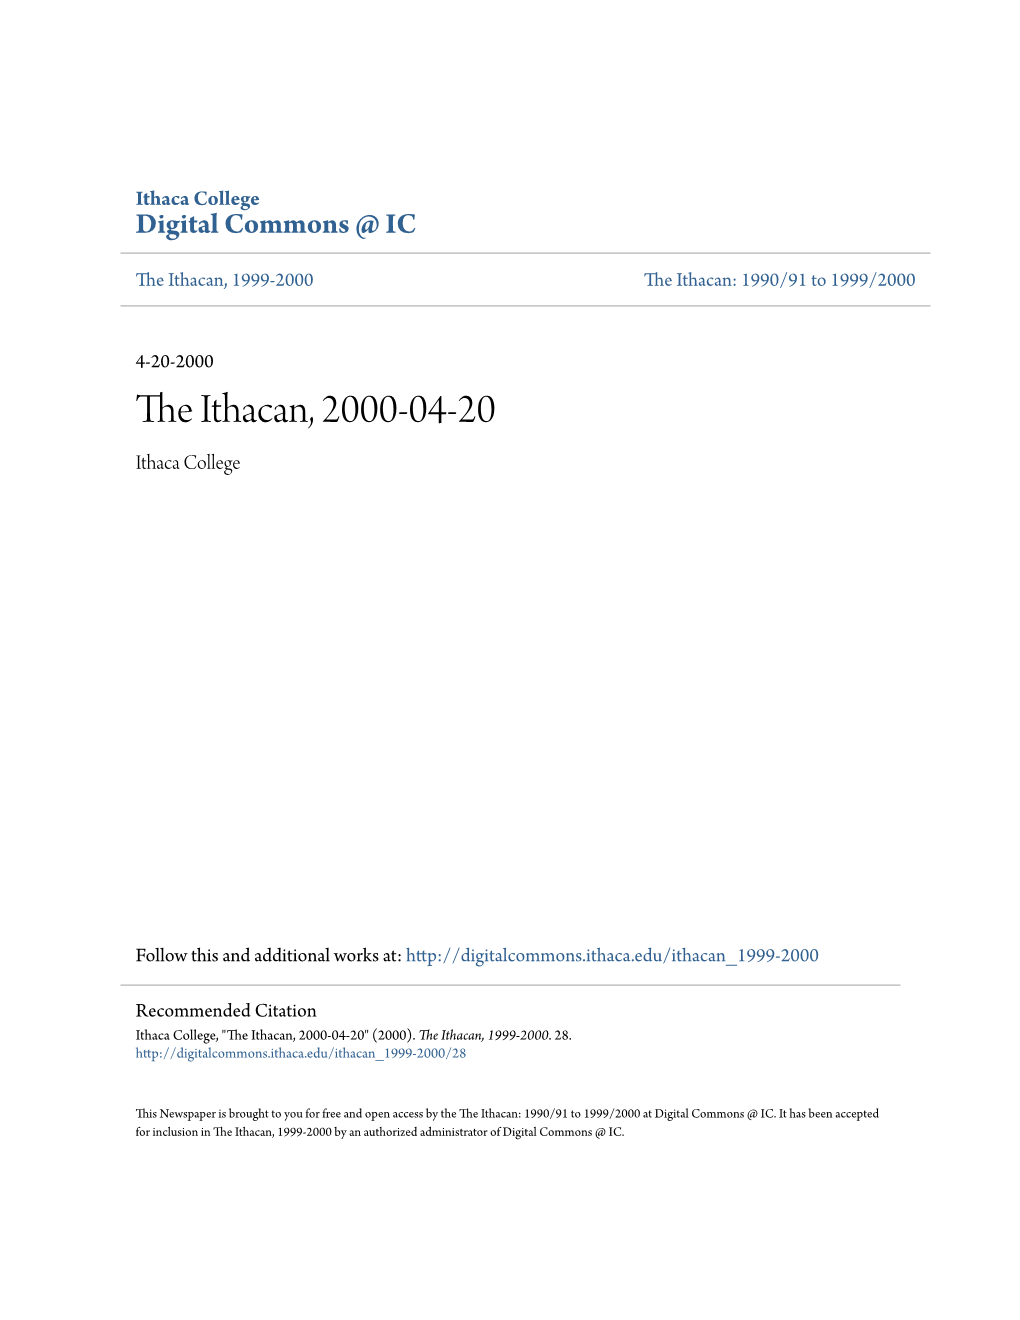 The Ithacan, 2000-04-20